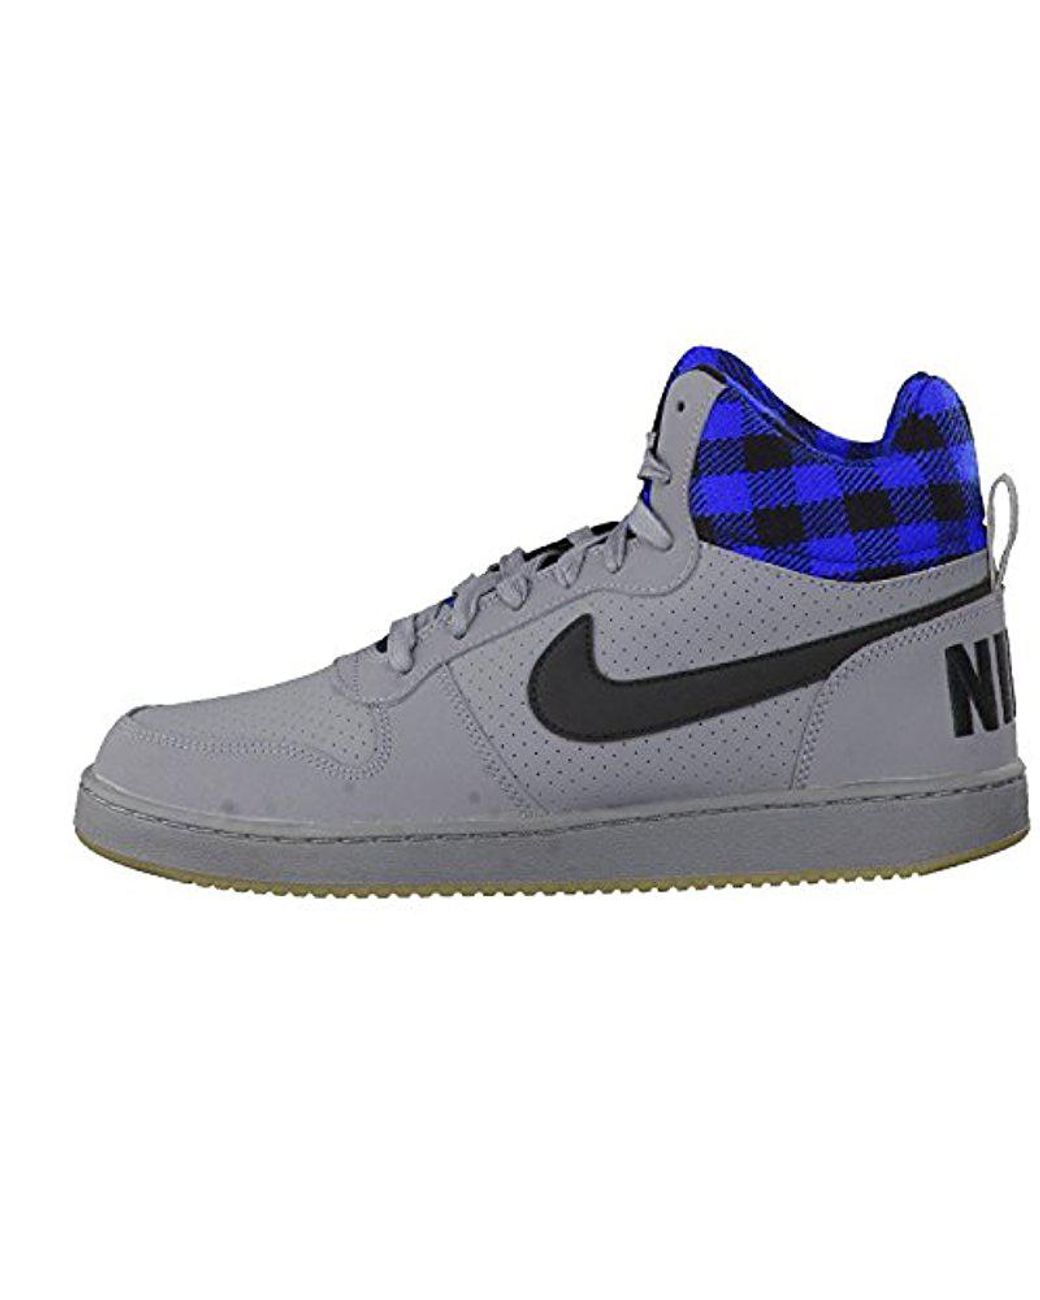 Nike Leather Court Borough Mid Basketball Shoes in Black-Blue-Grey 